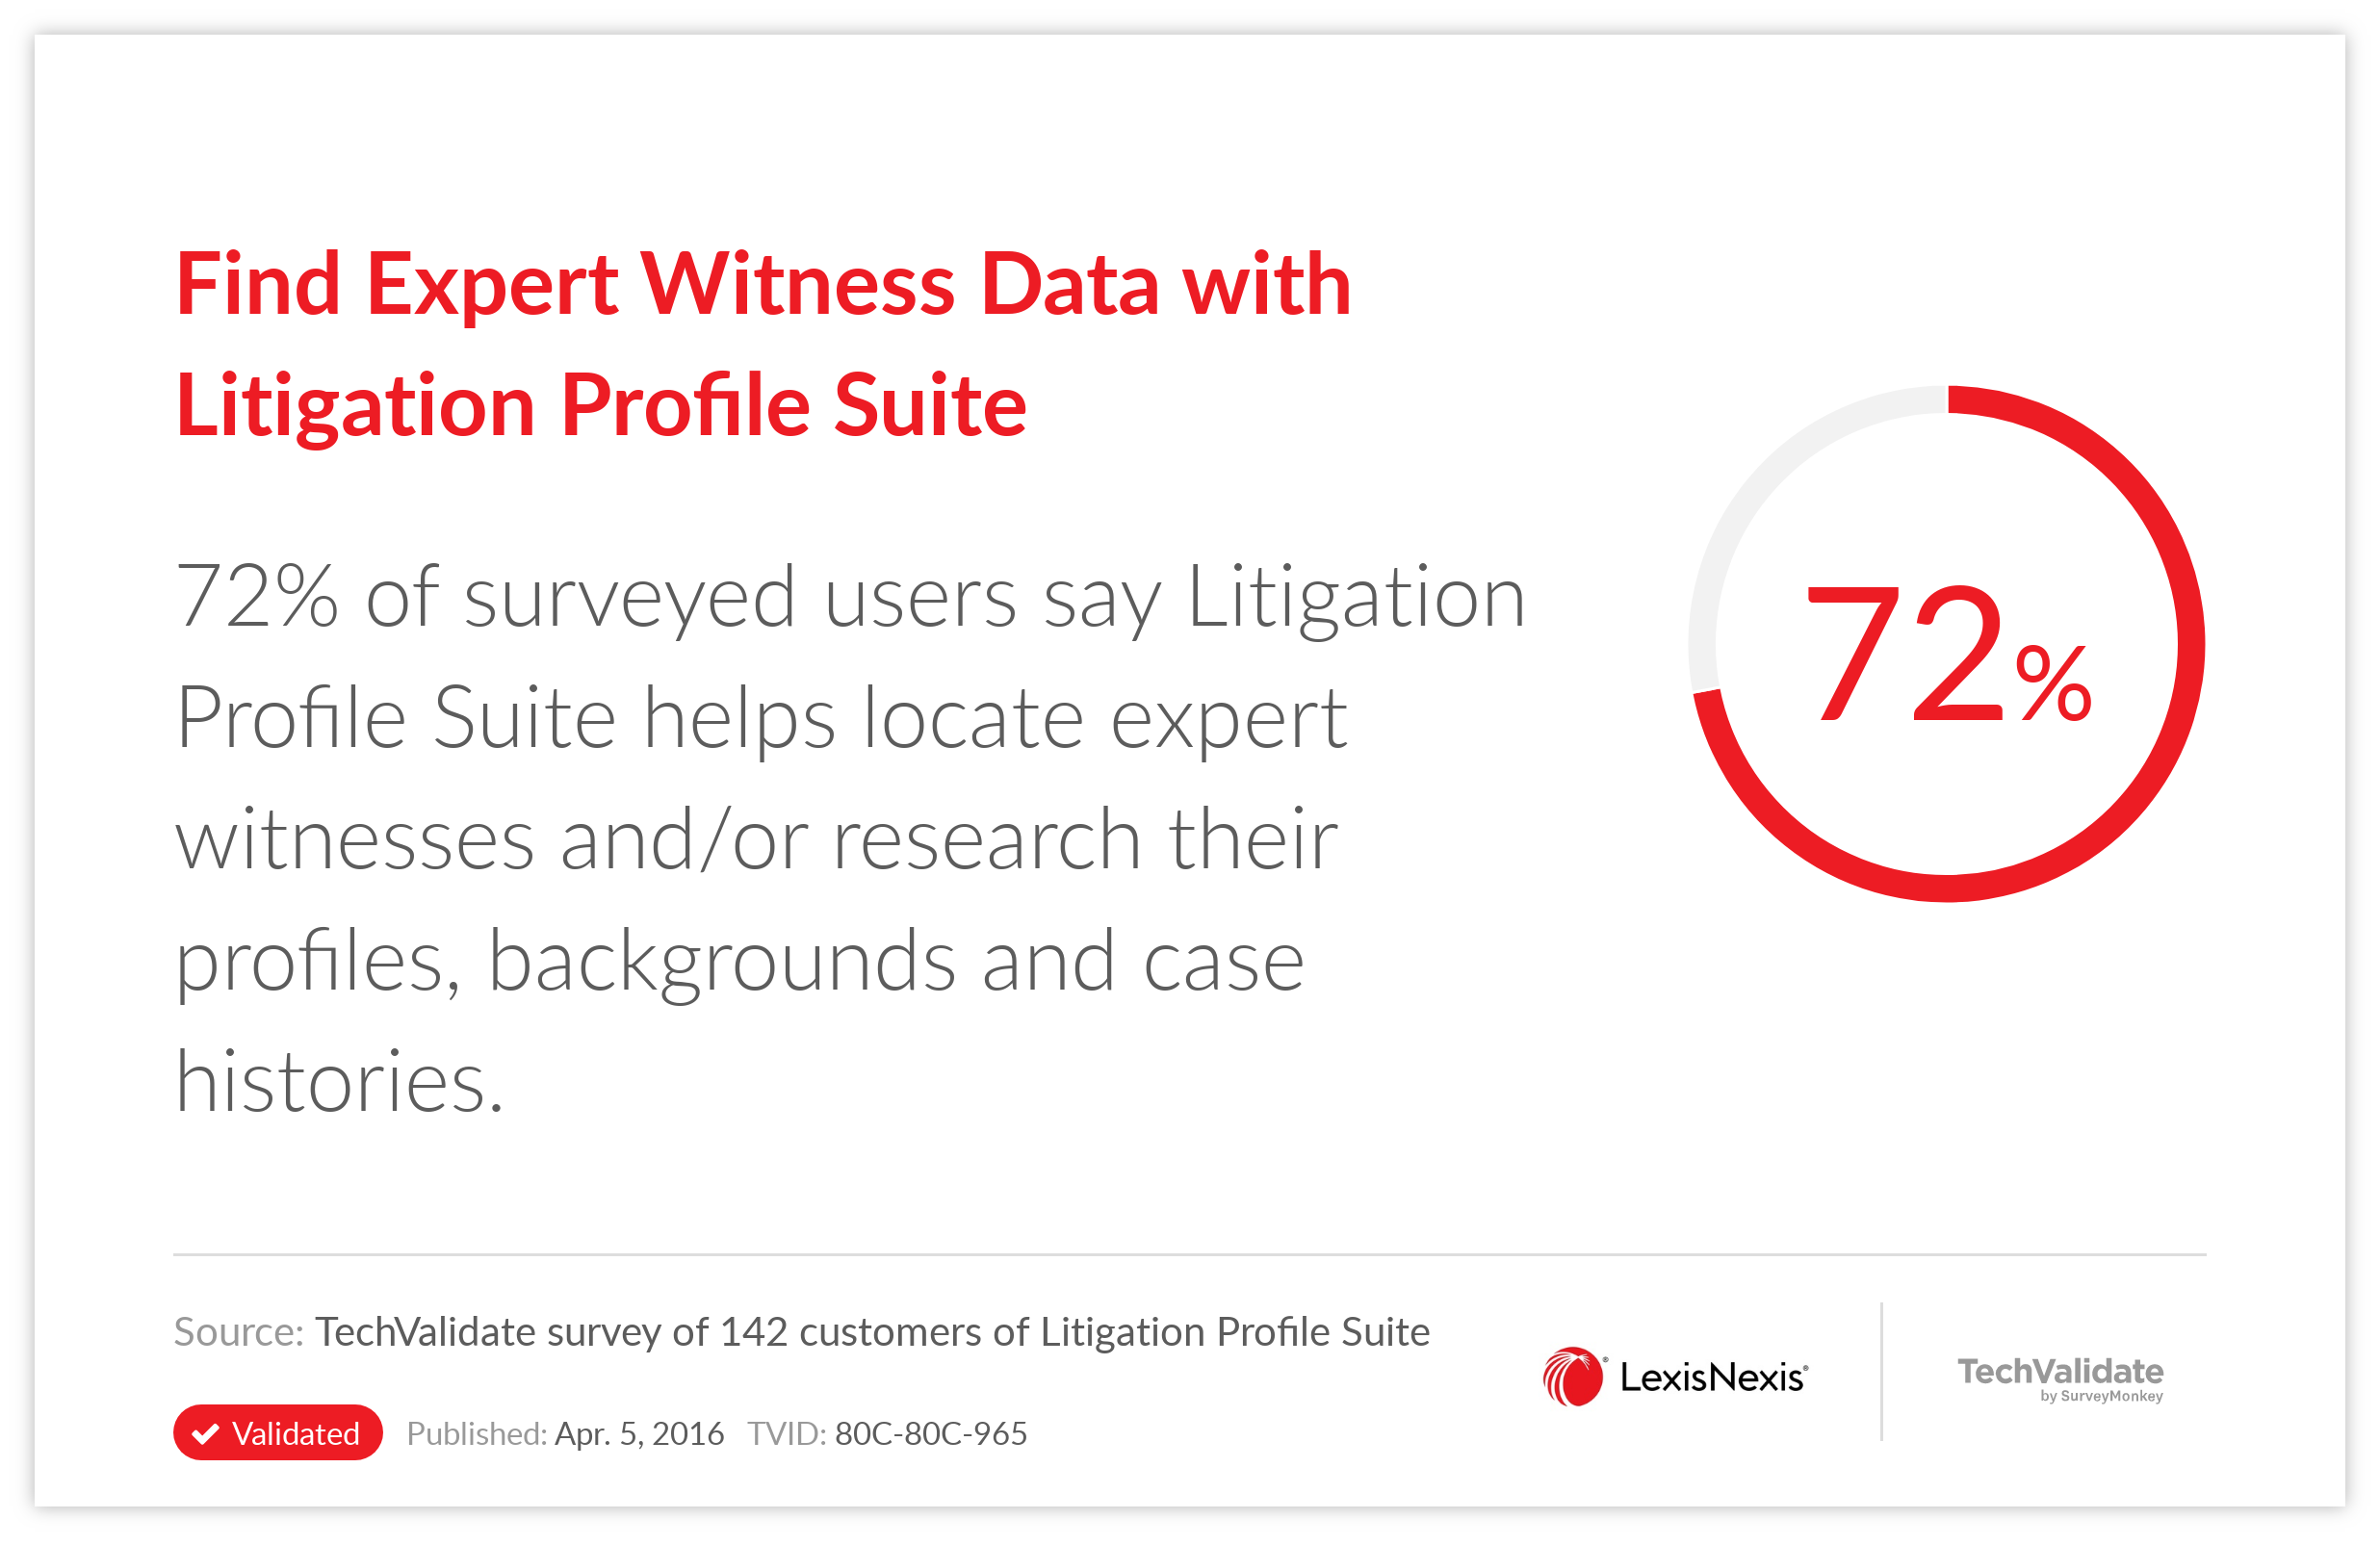 Find Expert Witness Data with Litigation Profile Suite